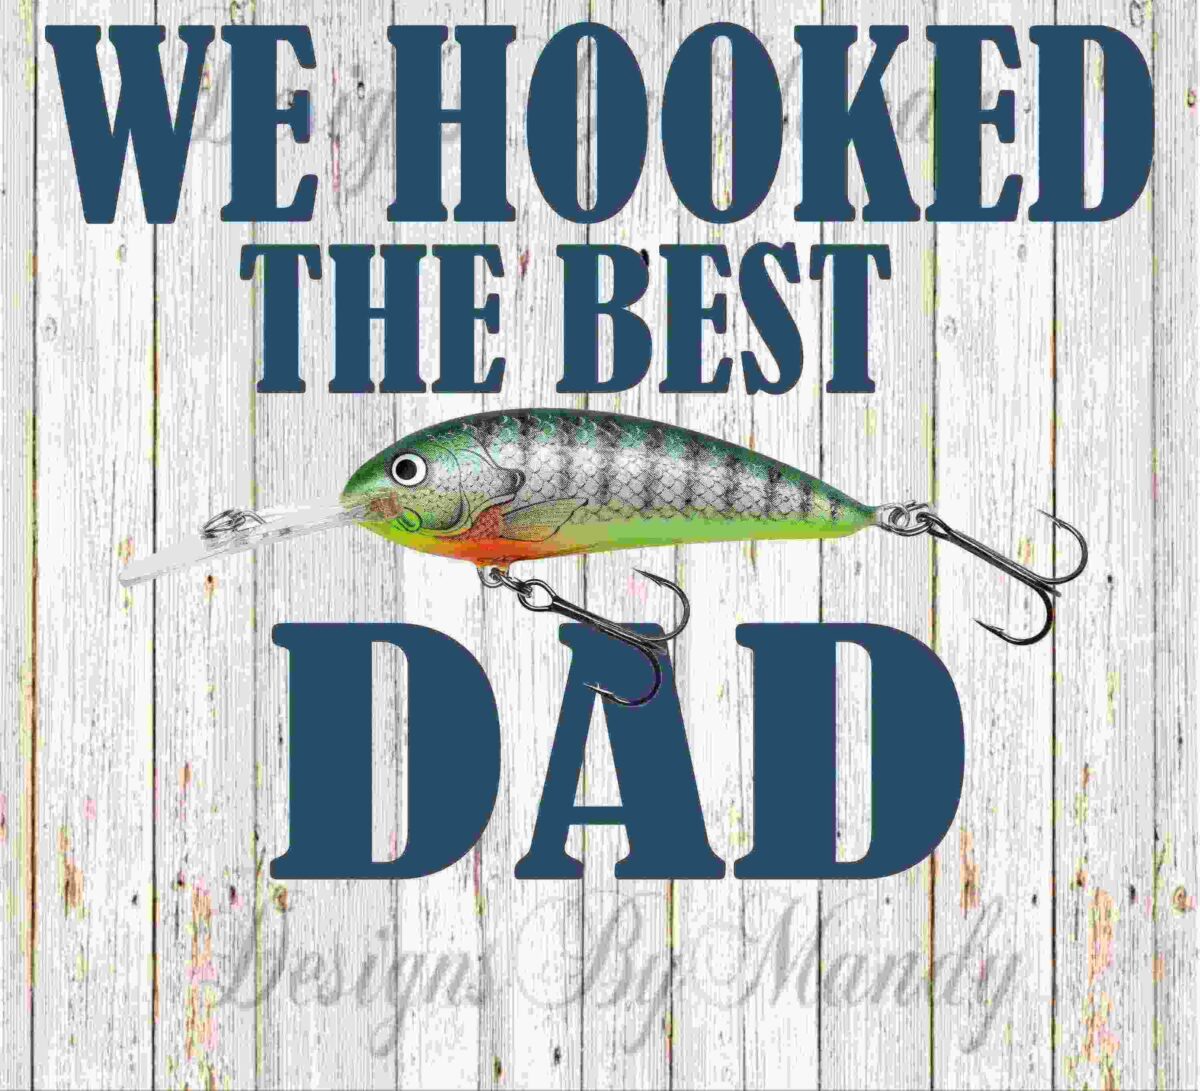 A wooden background with text "WE HOOKED THE BEST DAD" and an image of a fishing lure in the center.